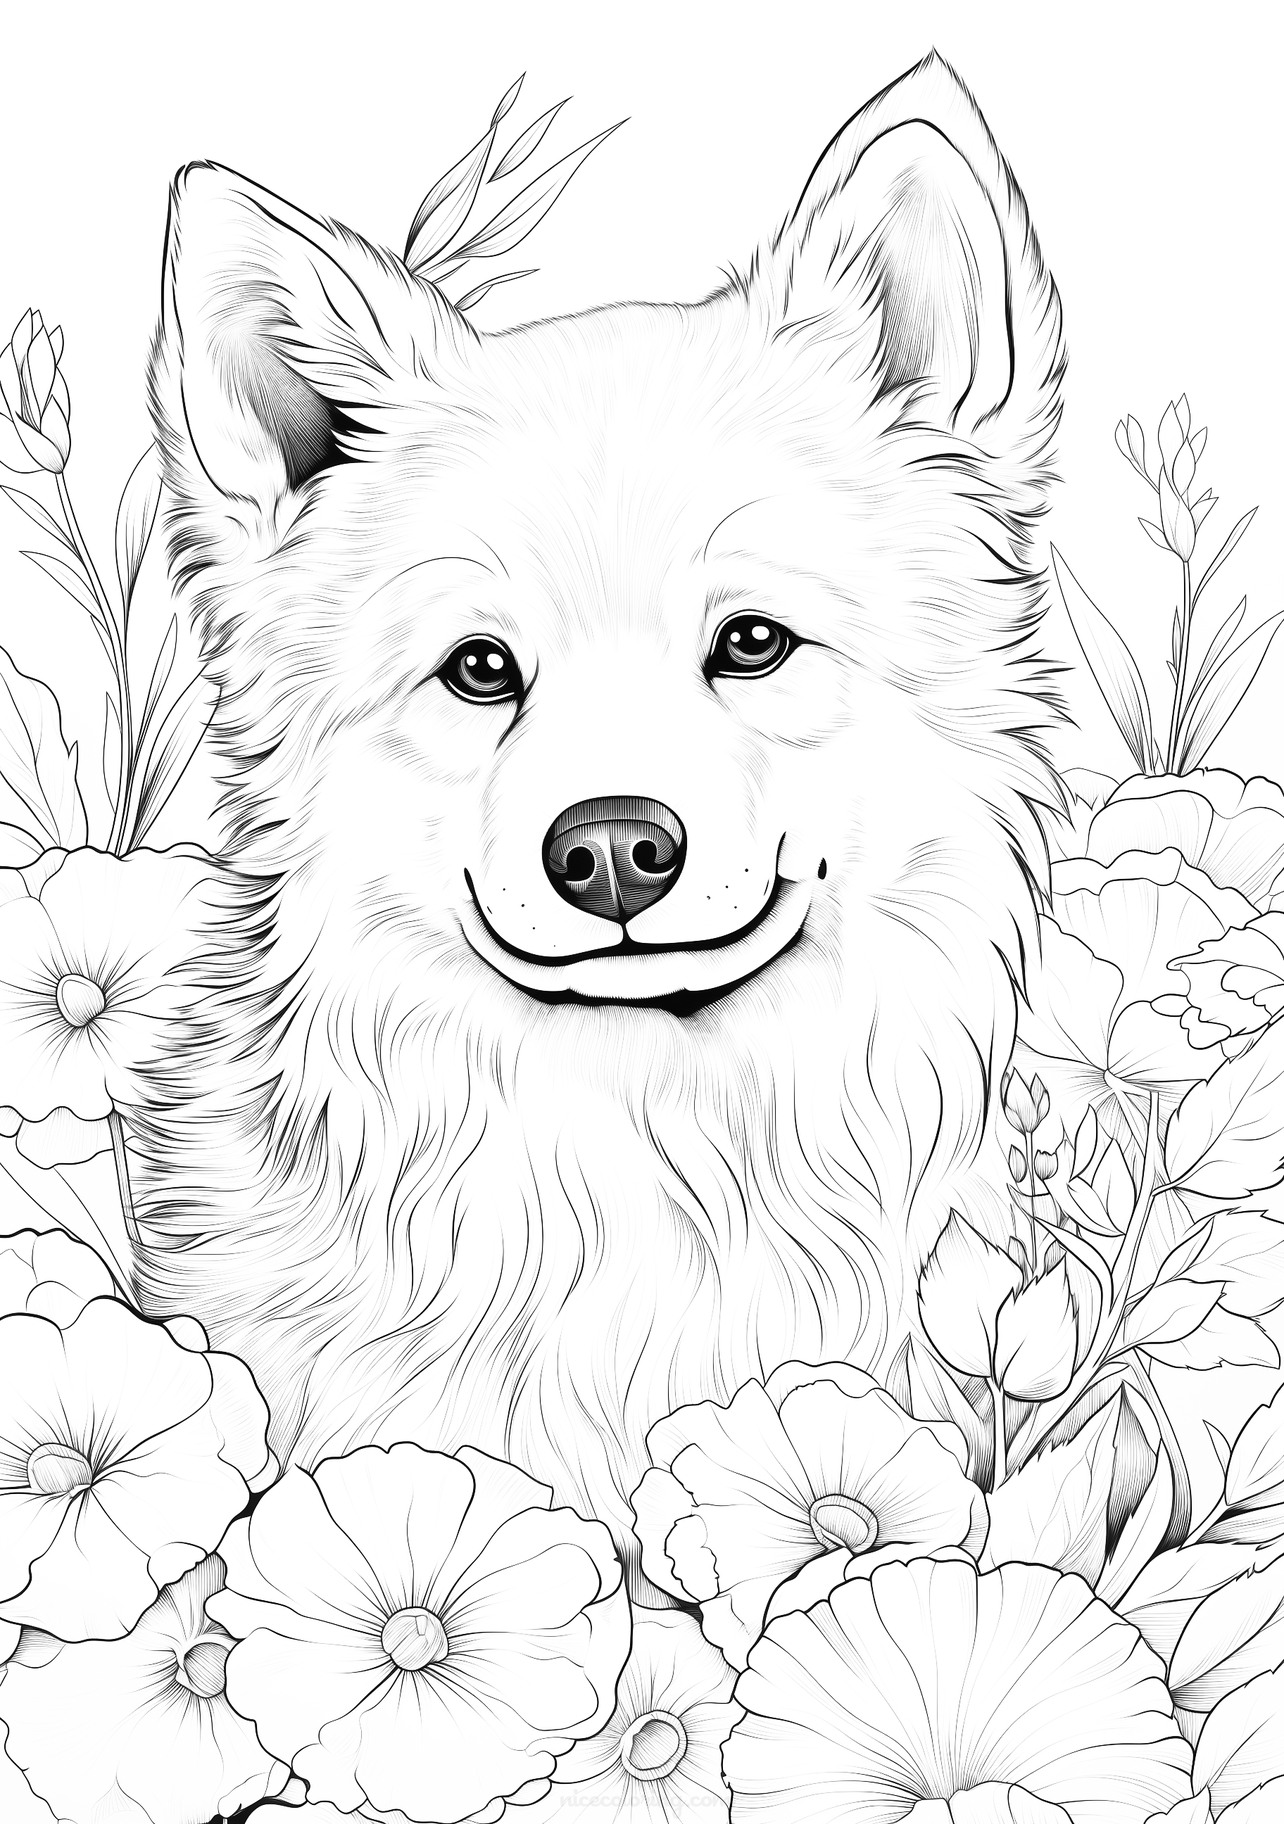 A cheerful fluffy dog nestled among blooming flowers coloring page